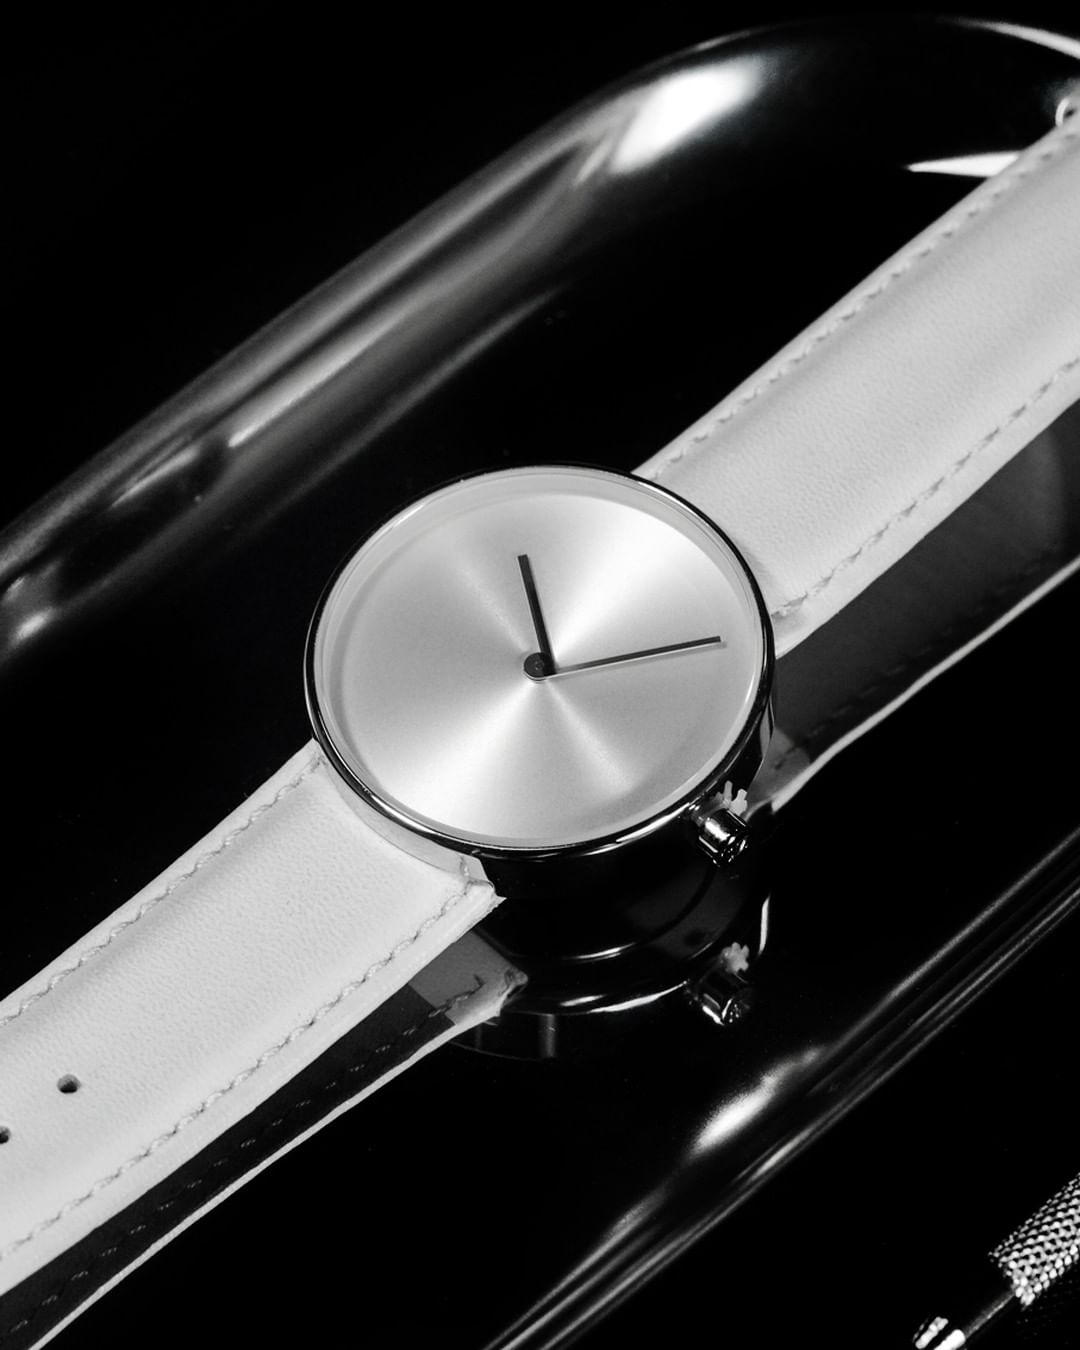 LIGHT WHITE｜CLASSIC SILVER｜ZUWATCH SERIES - yunivers hsieh